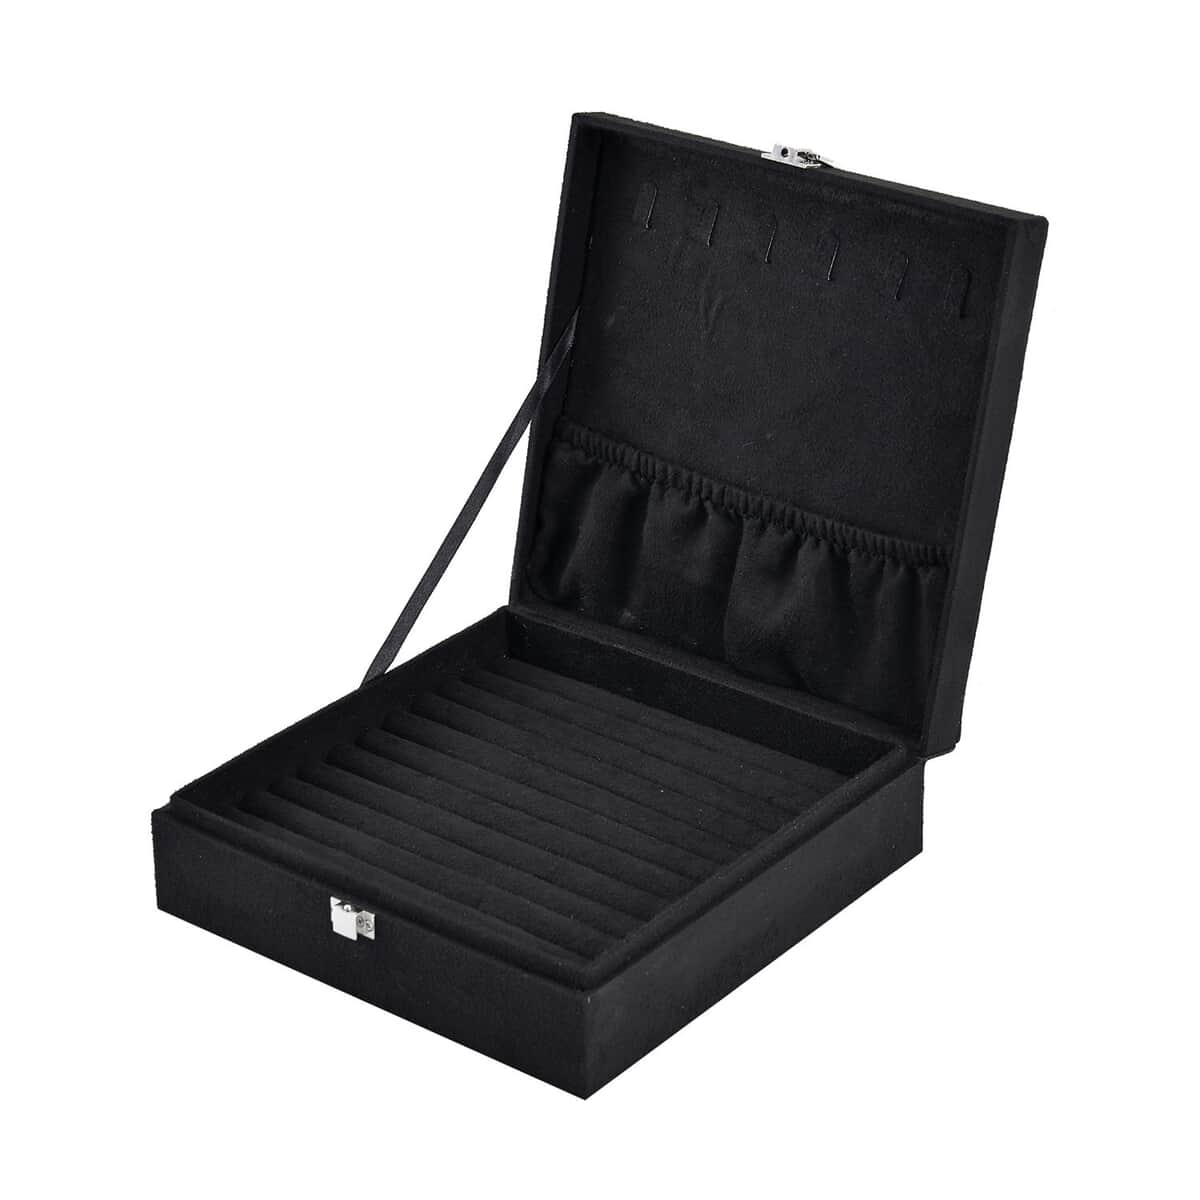 Black Velvet & MDF Jewelry Box with Latch Clasp 7.9"x7.9"x2.6") (11 Ring Slot, 6 Hooks for Necklace, Pocket) image number 3